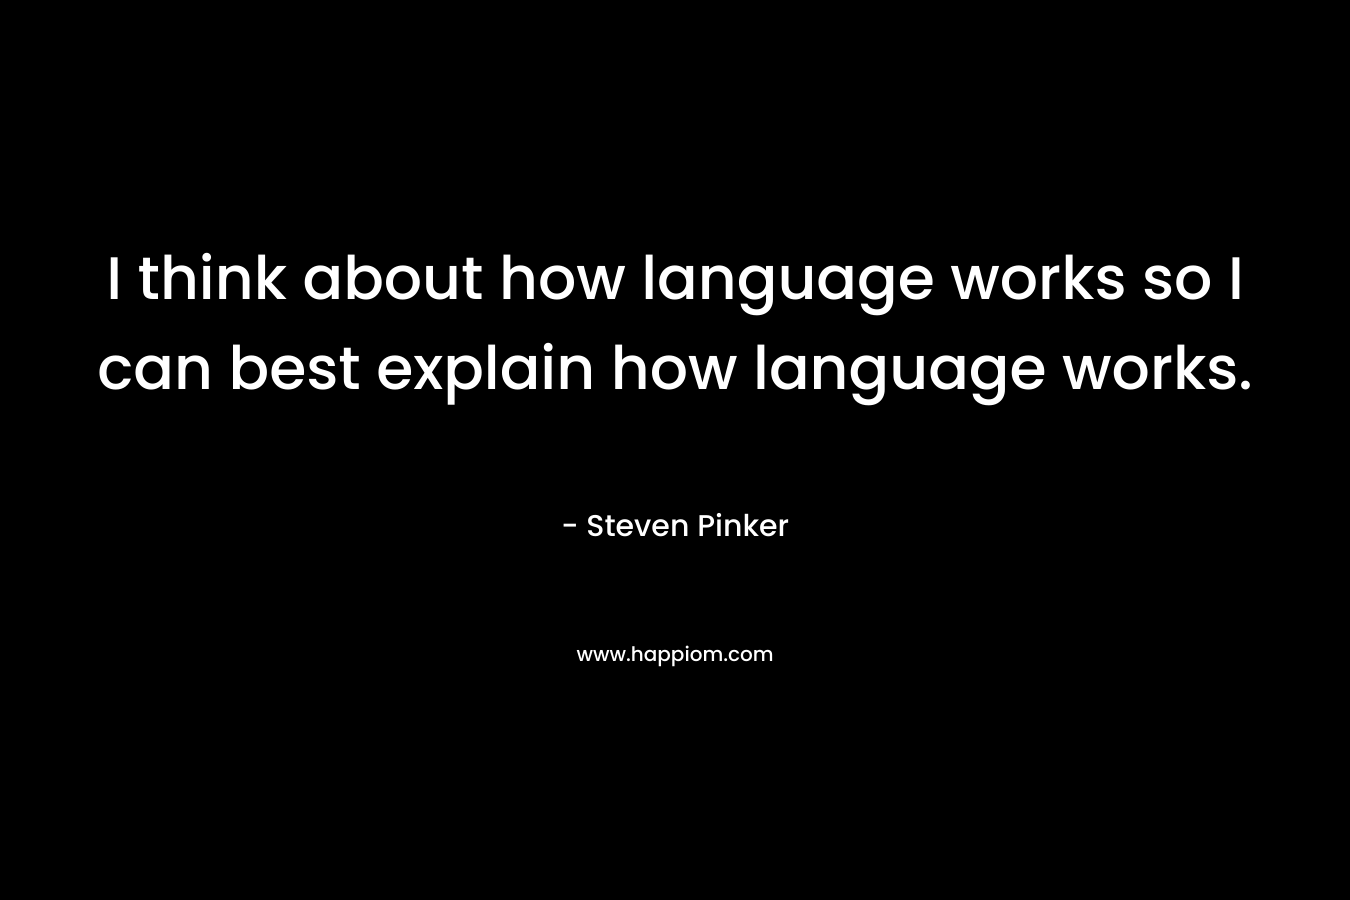 I think about how language works so I can best explain how language works. – Steven Pinker